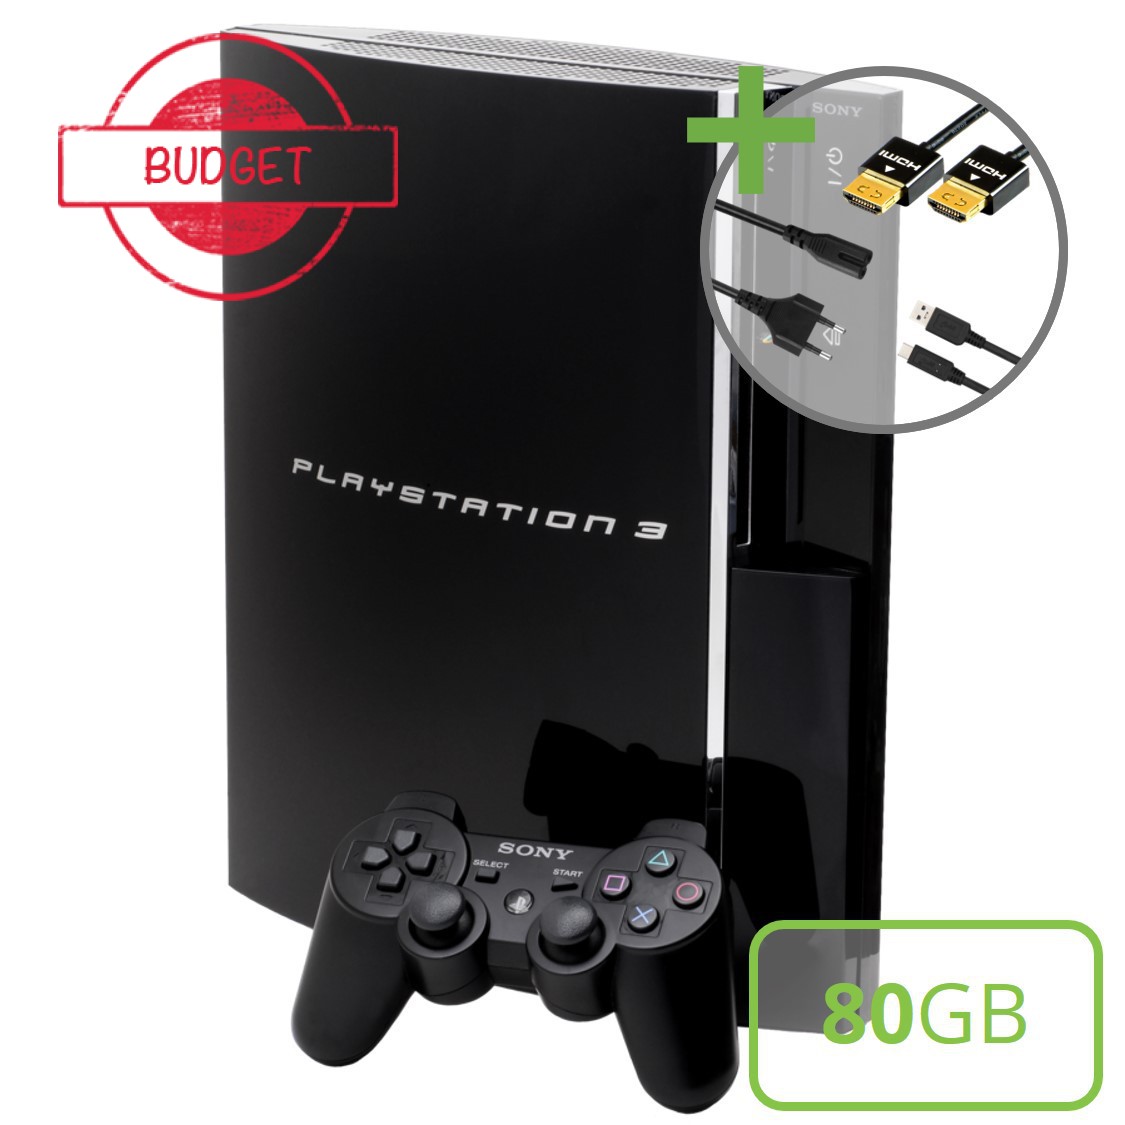 Sony PlayStation 3 Phat (80GB) Starter Pack - Sixaxis Edition - Budget - Playstation 3 Hardware - 2